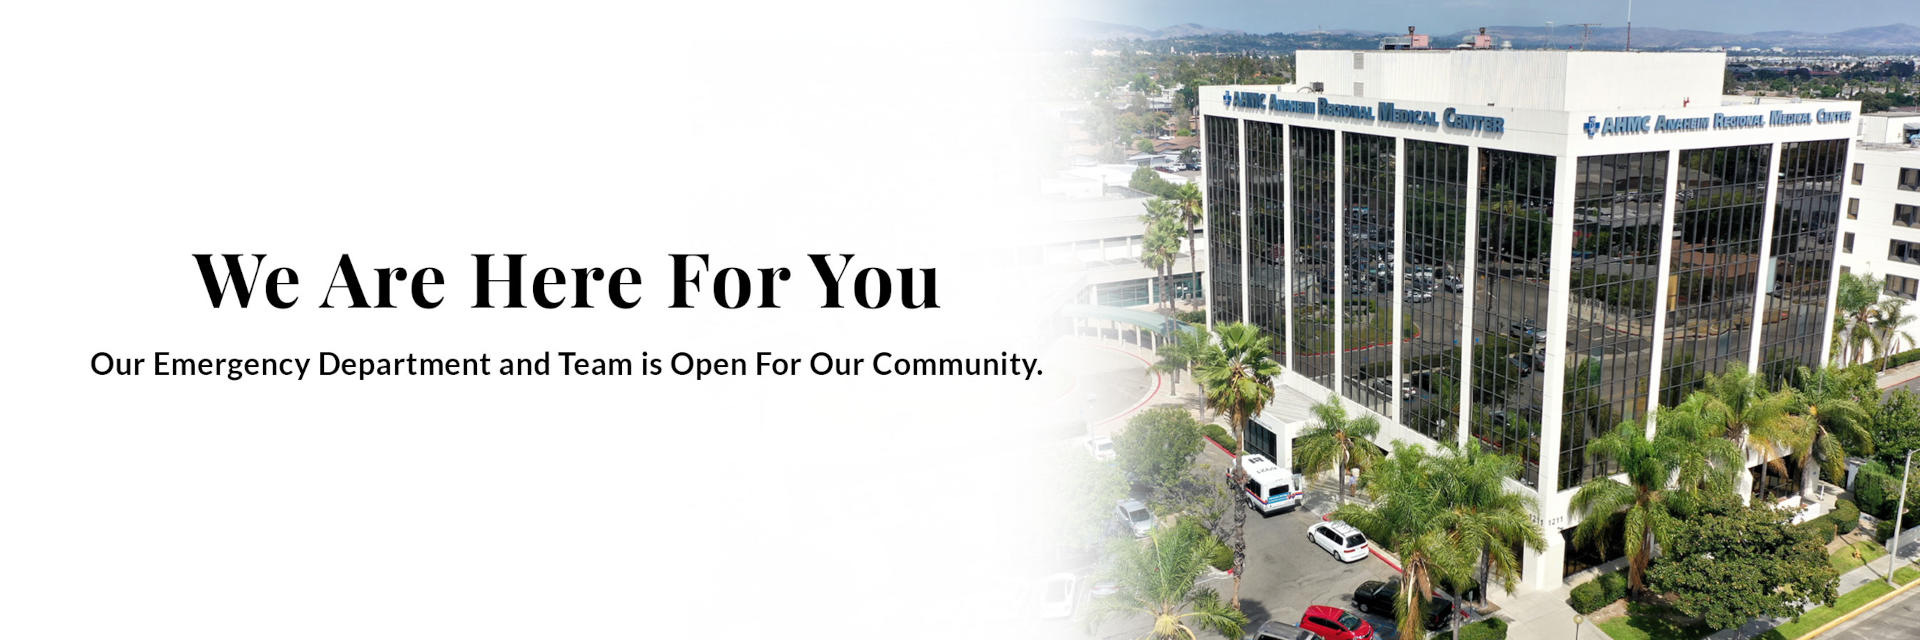 Banner picture of sky view shot- AHMC. There is palm trees and vehicles outside of the building. Banner says:

We Are Here For You
Our Emergency Department and Team is Open For Our Community.